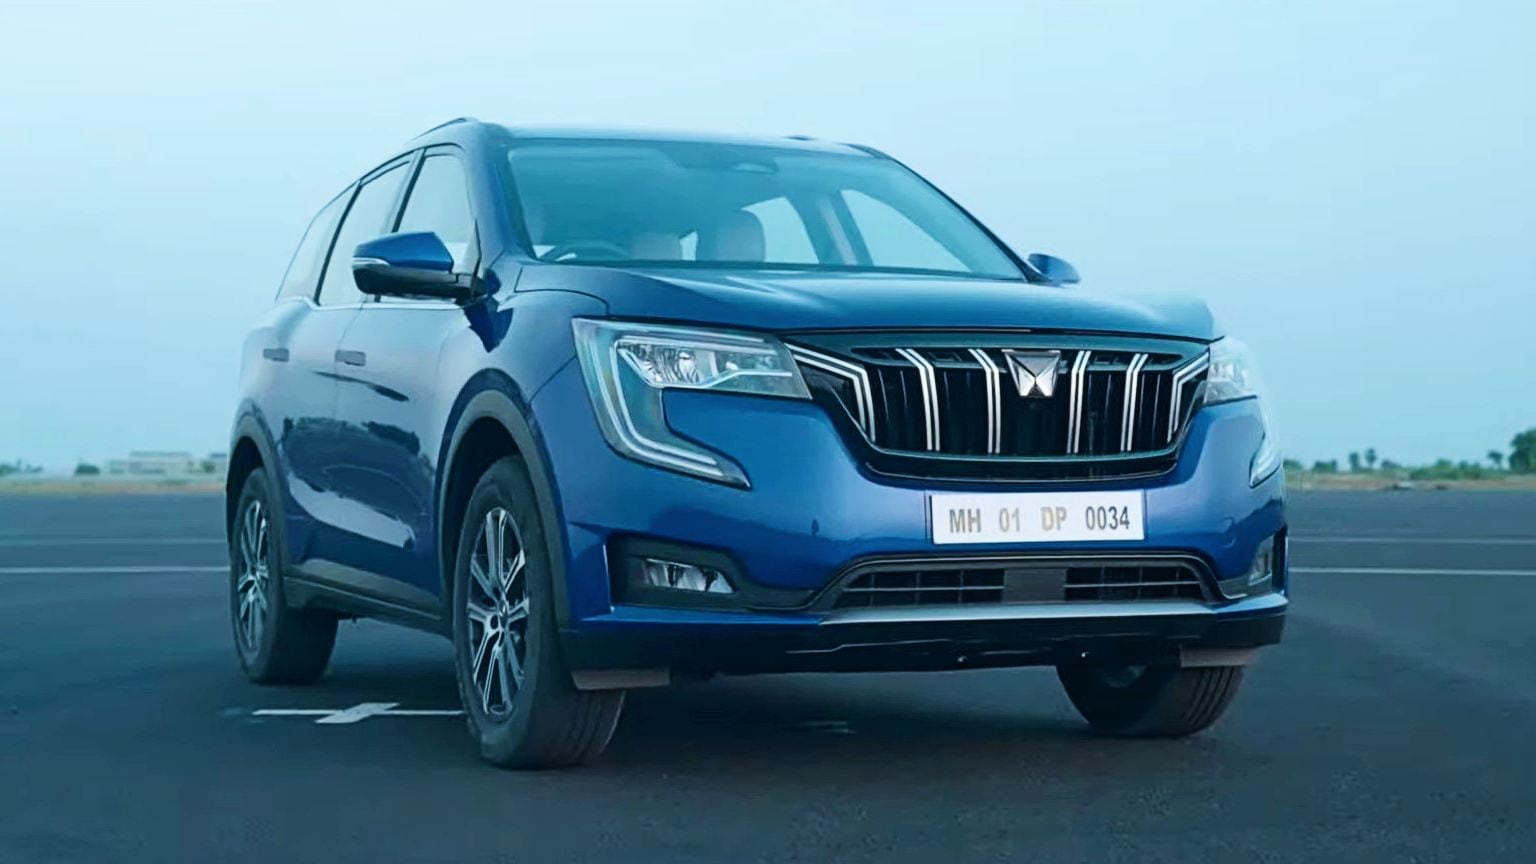 Mahindra XUV700 in picture: Take a look at its exterior, interior, features, powertrains and more- Technology News, Firstpost